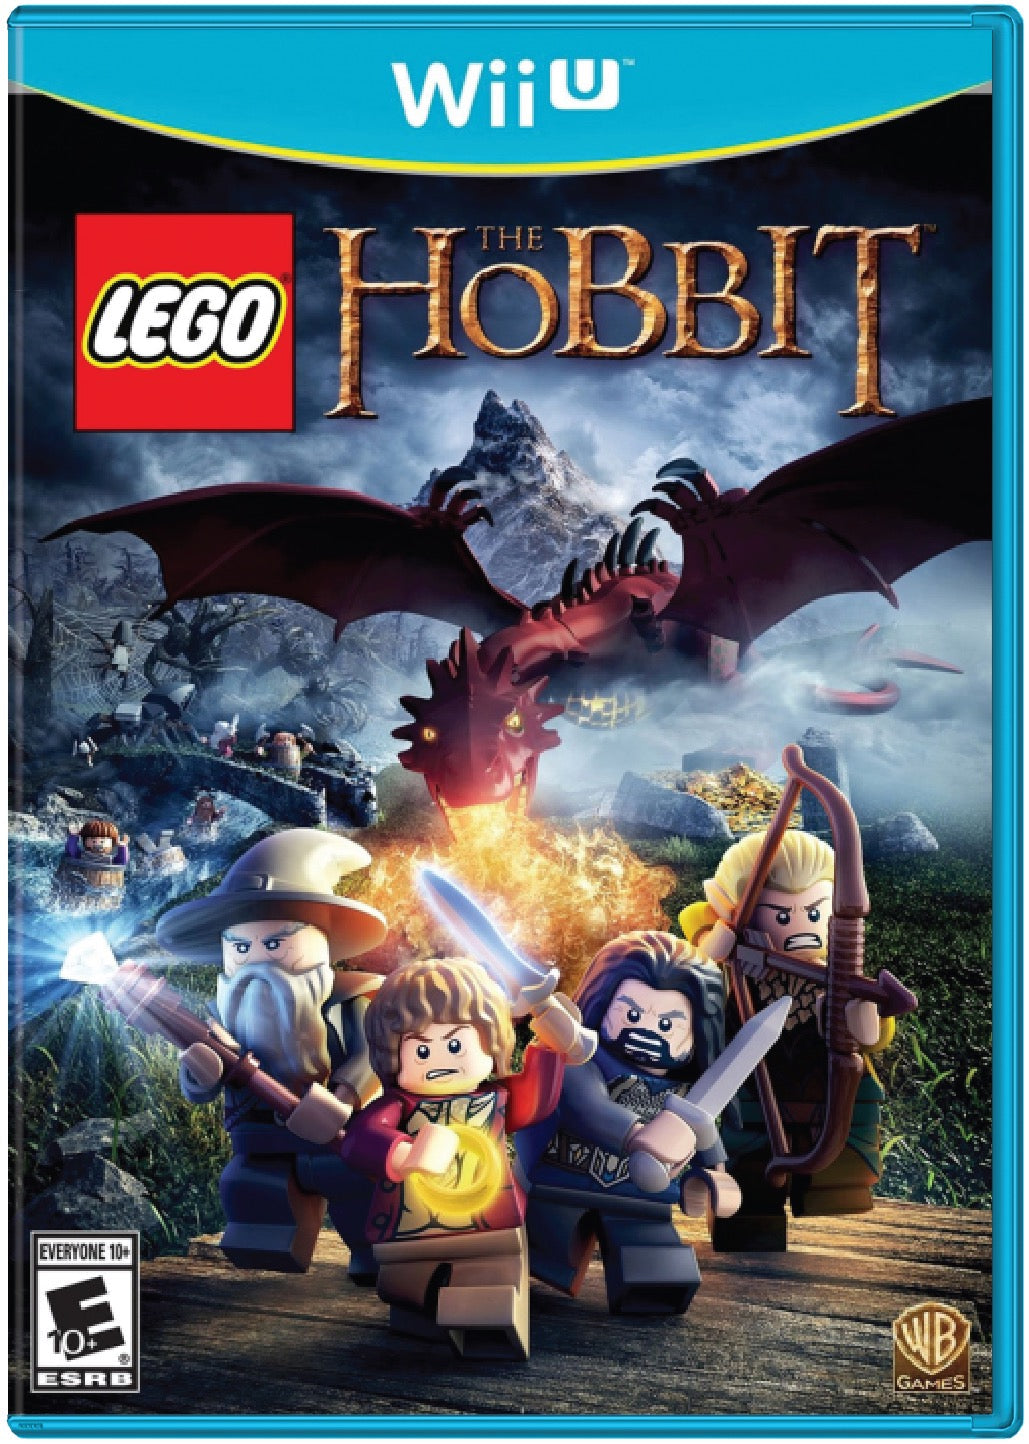 LEGO The Hobbit Cover Art and Product Photo